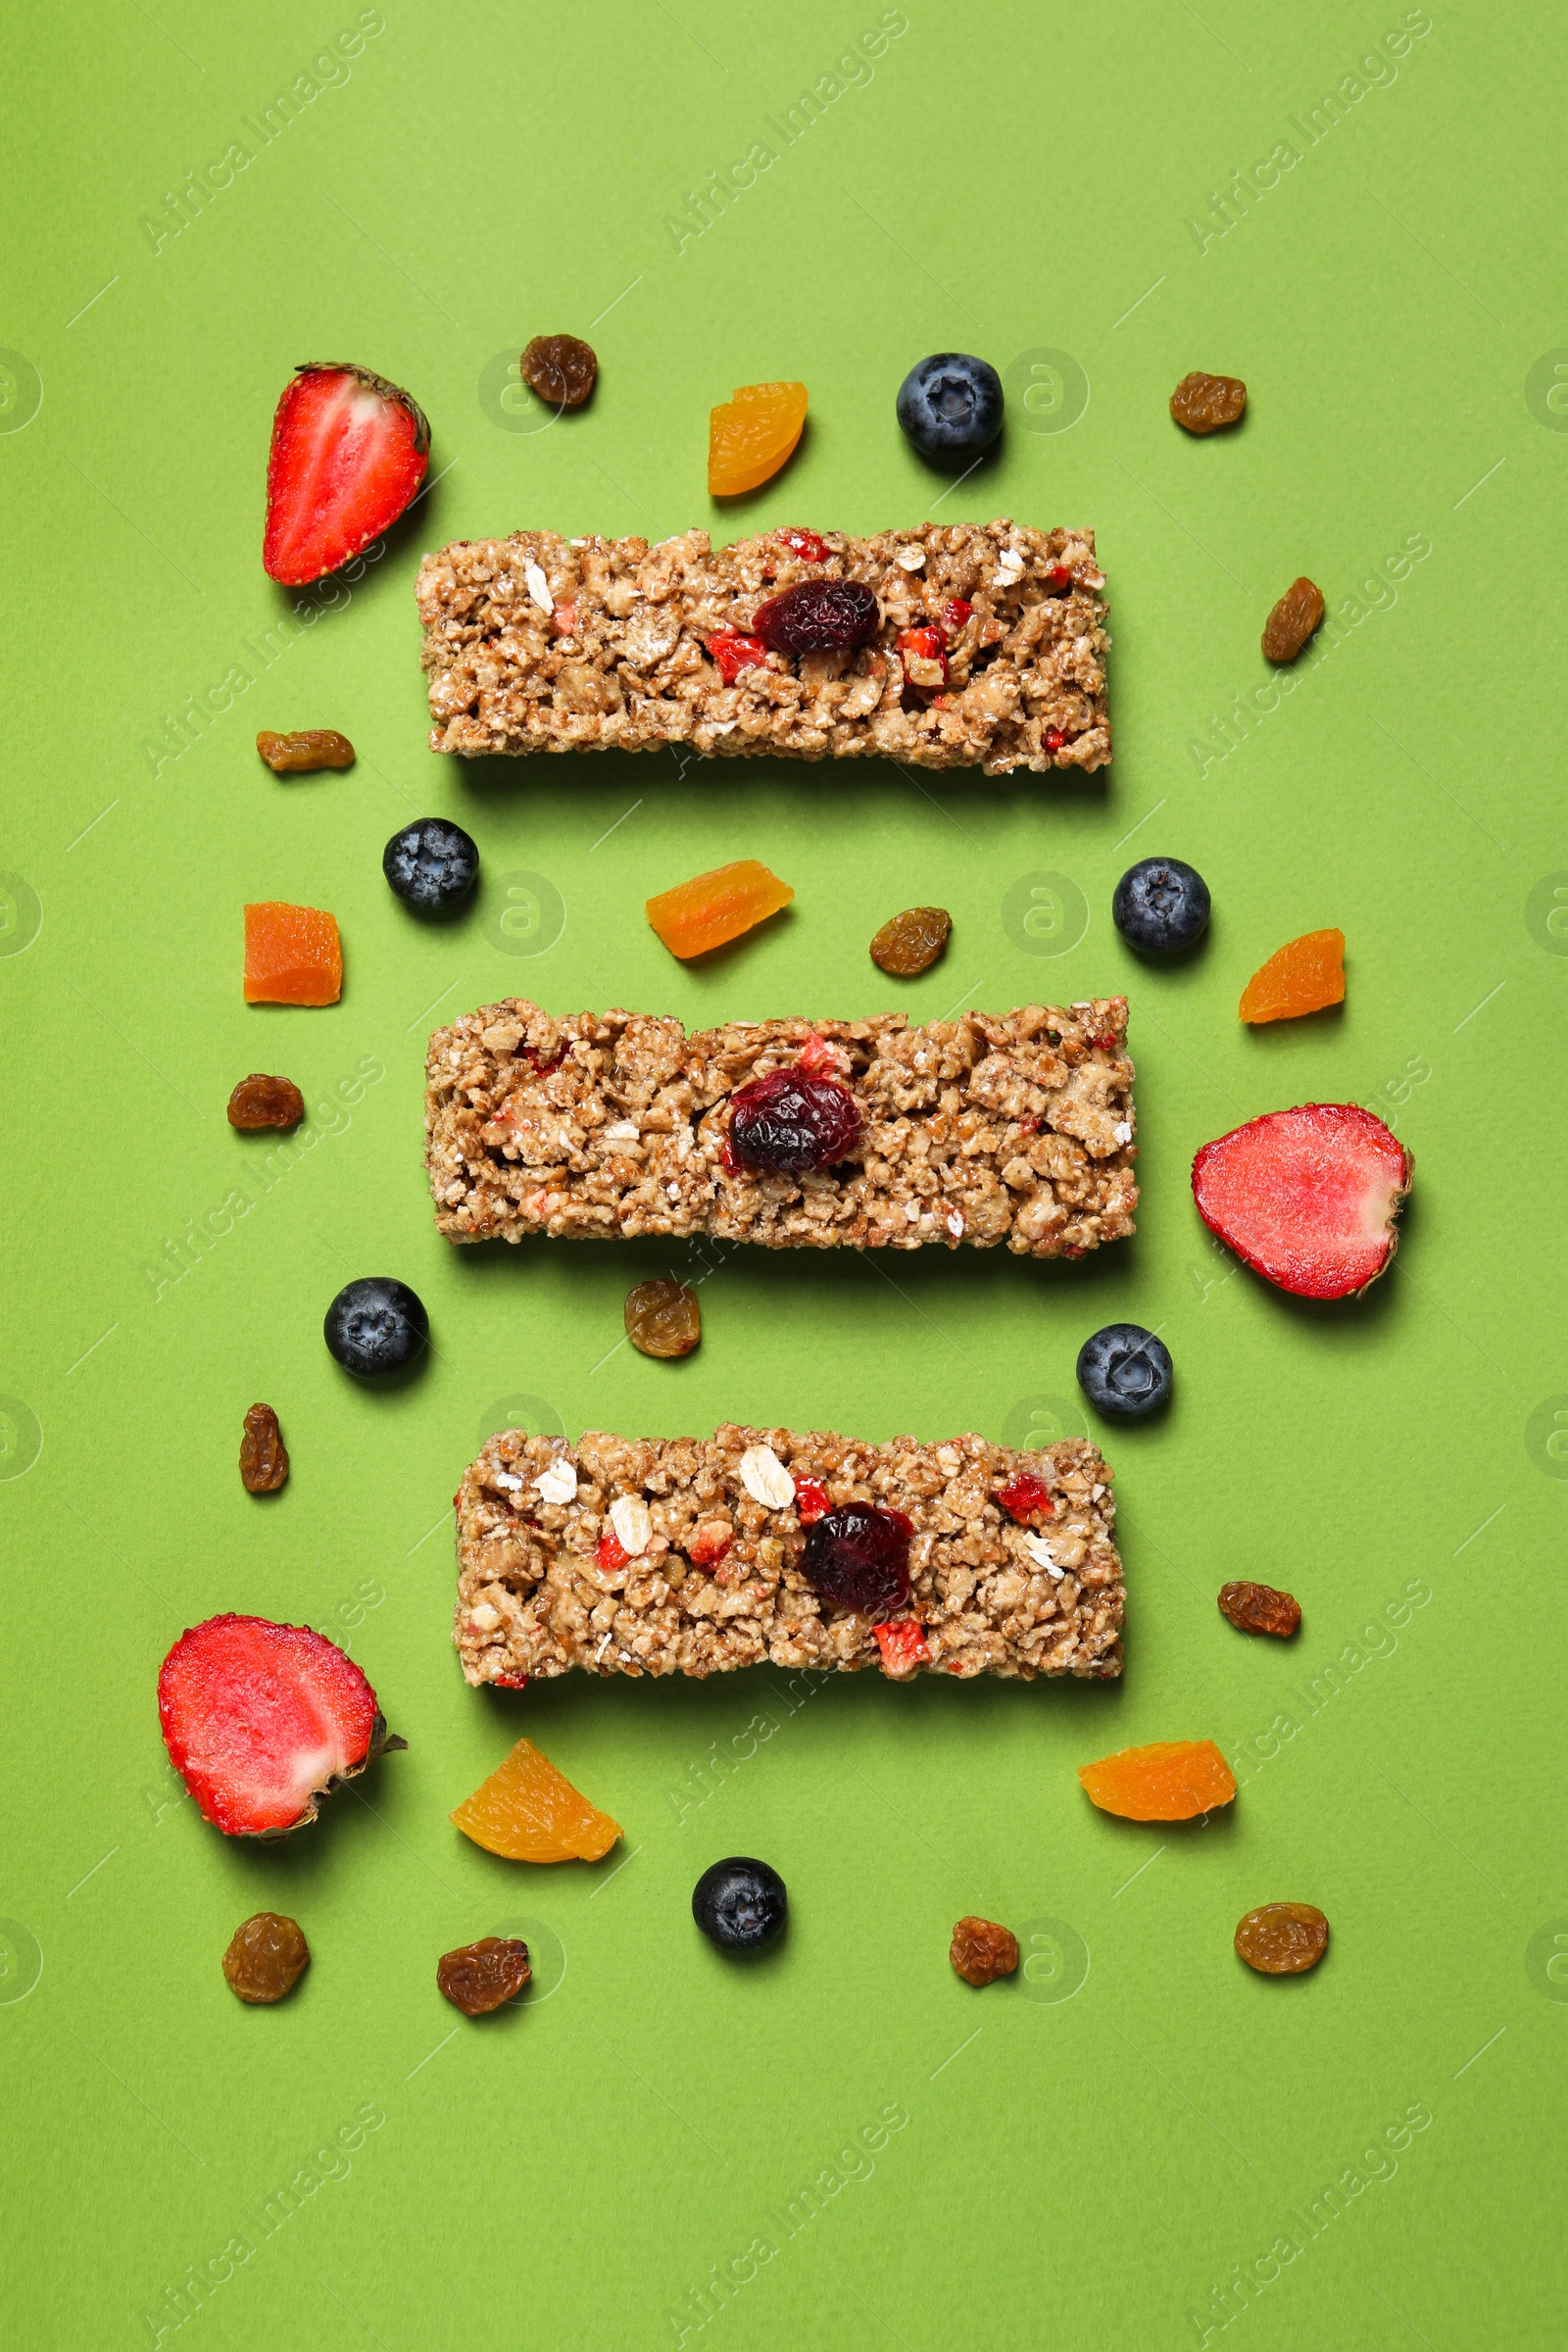 Photo of Tasty granola bars and ingredients on green background, flat lay